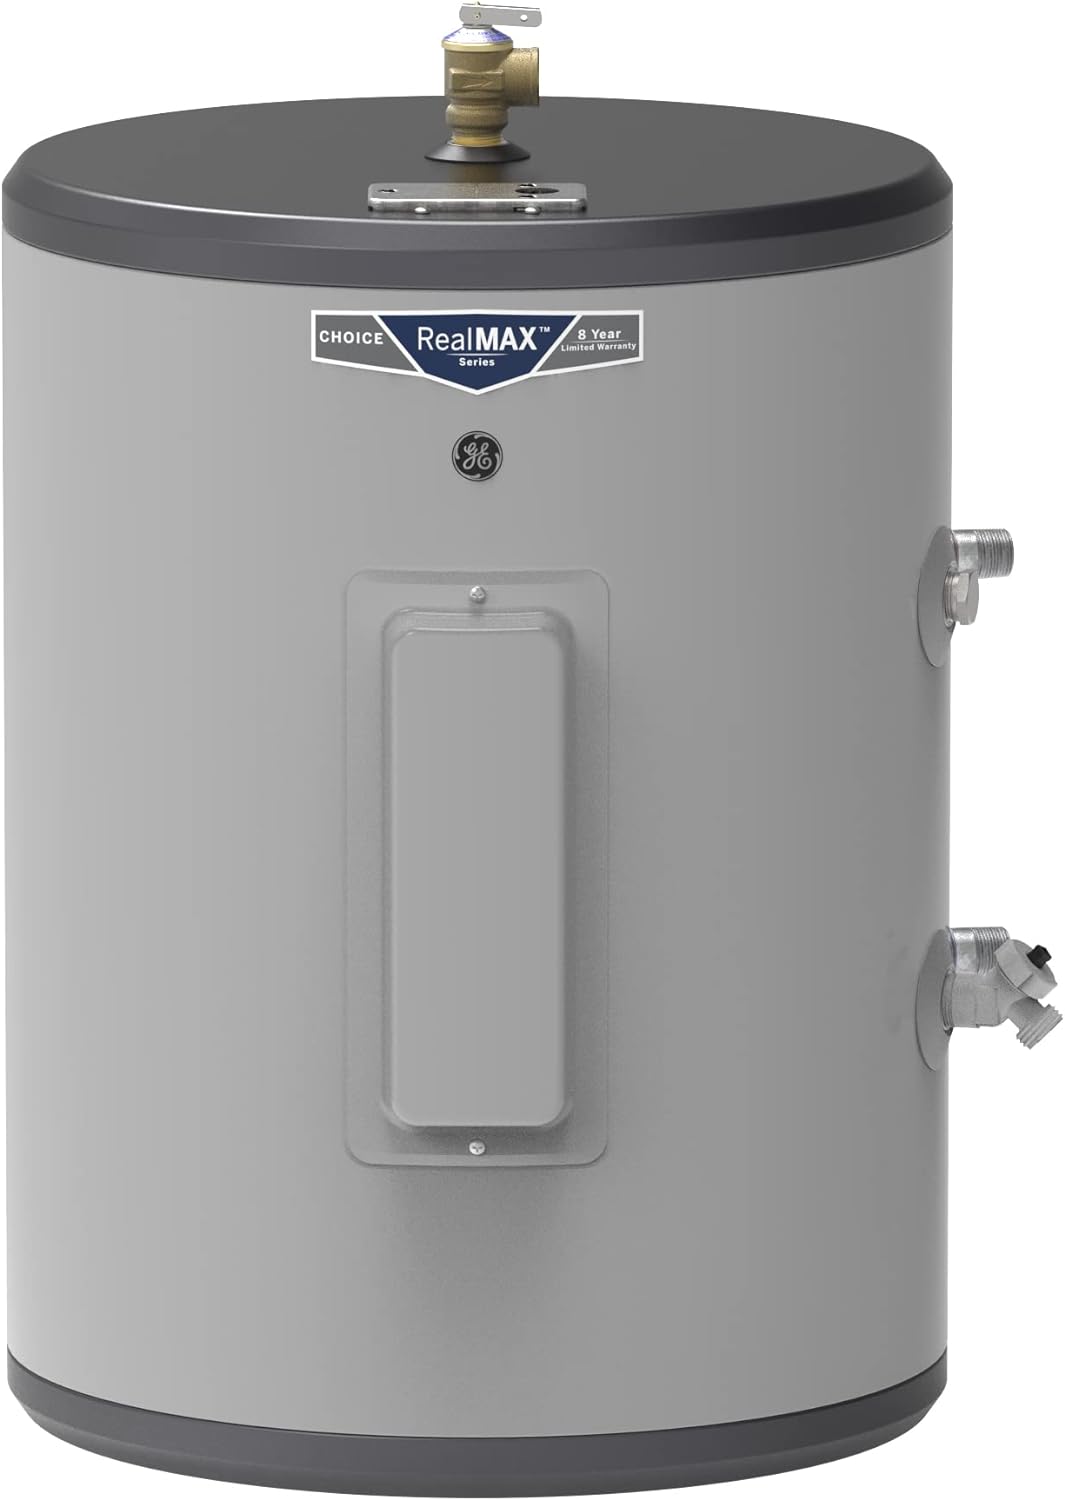 GE Appliances Point of Use Water Heater | Electric Water Heater with Adjustable Thermostat & Drain